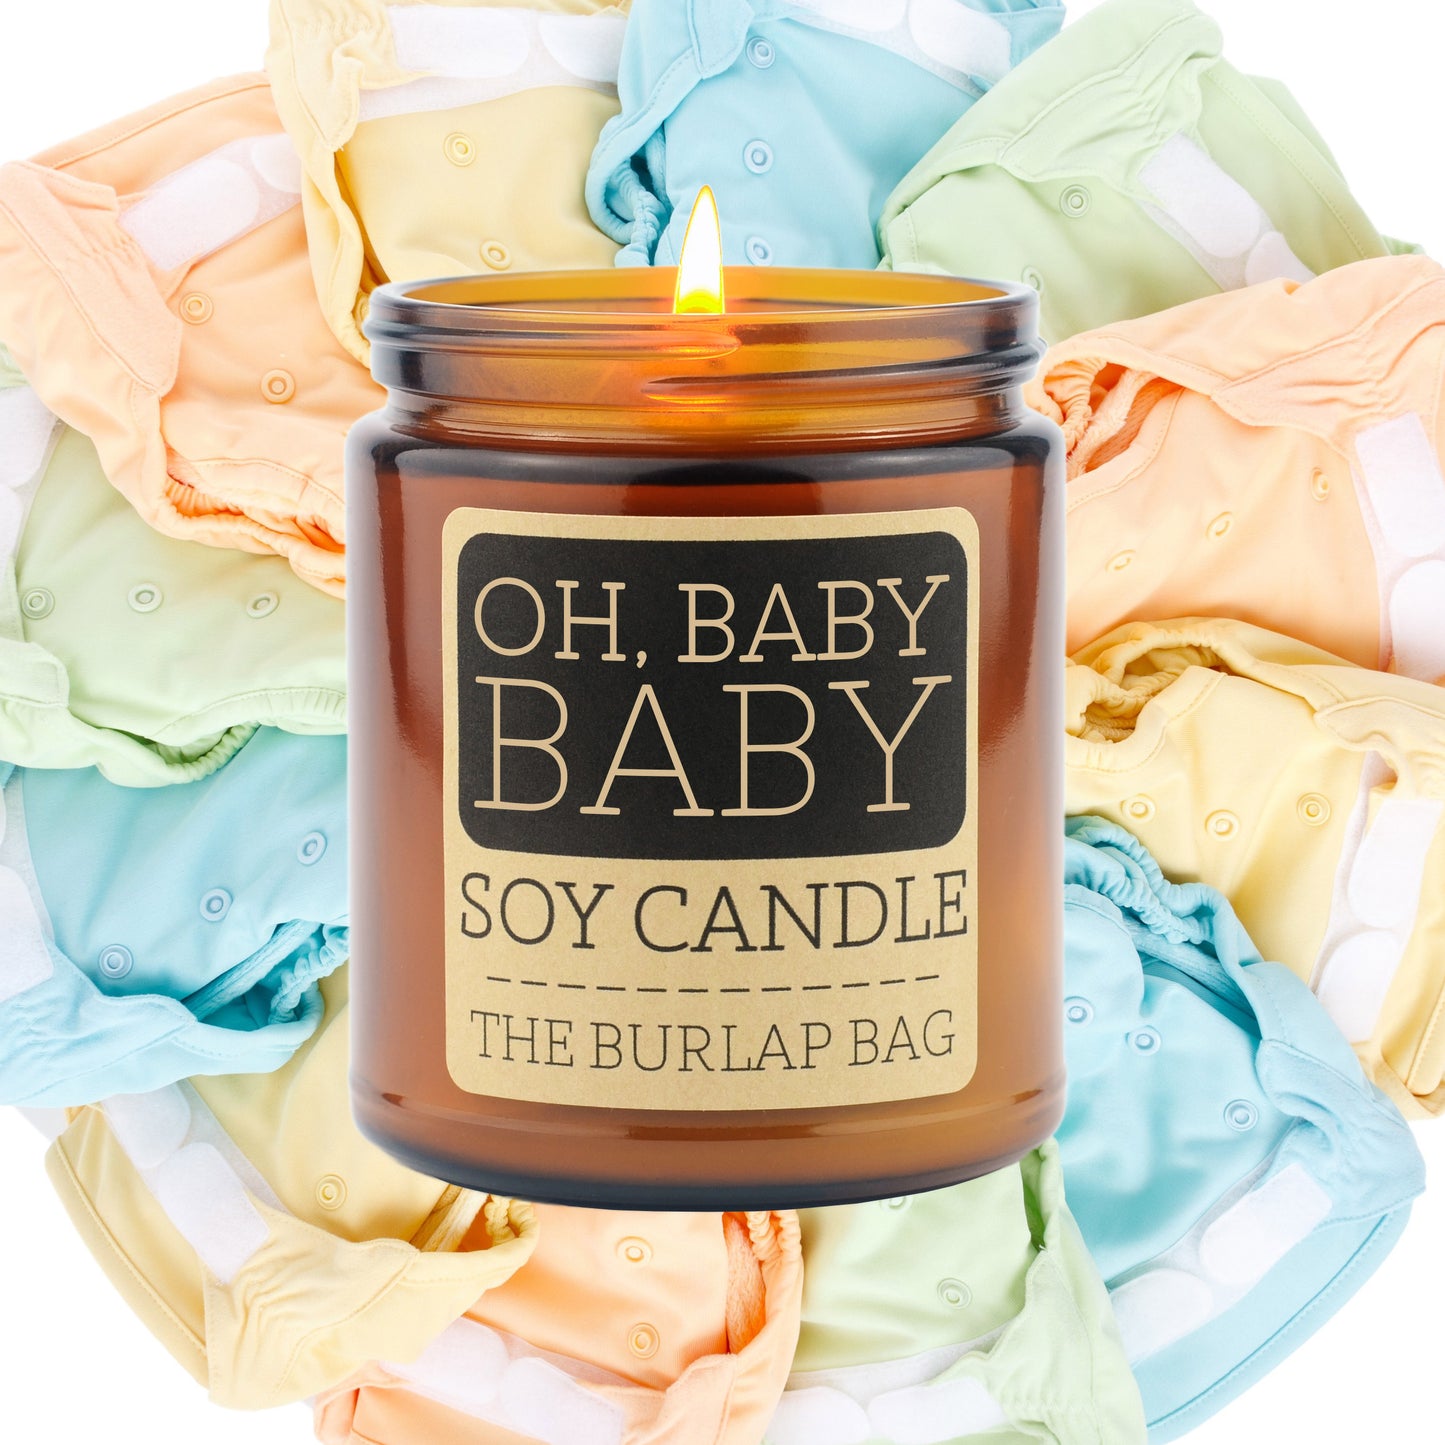 Oh, Baby Baby - Soy Candle 9oz